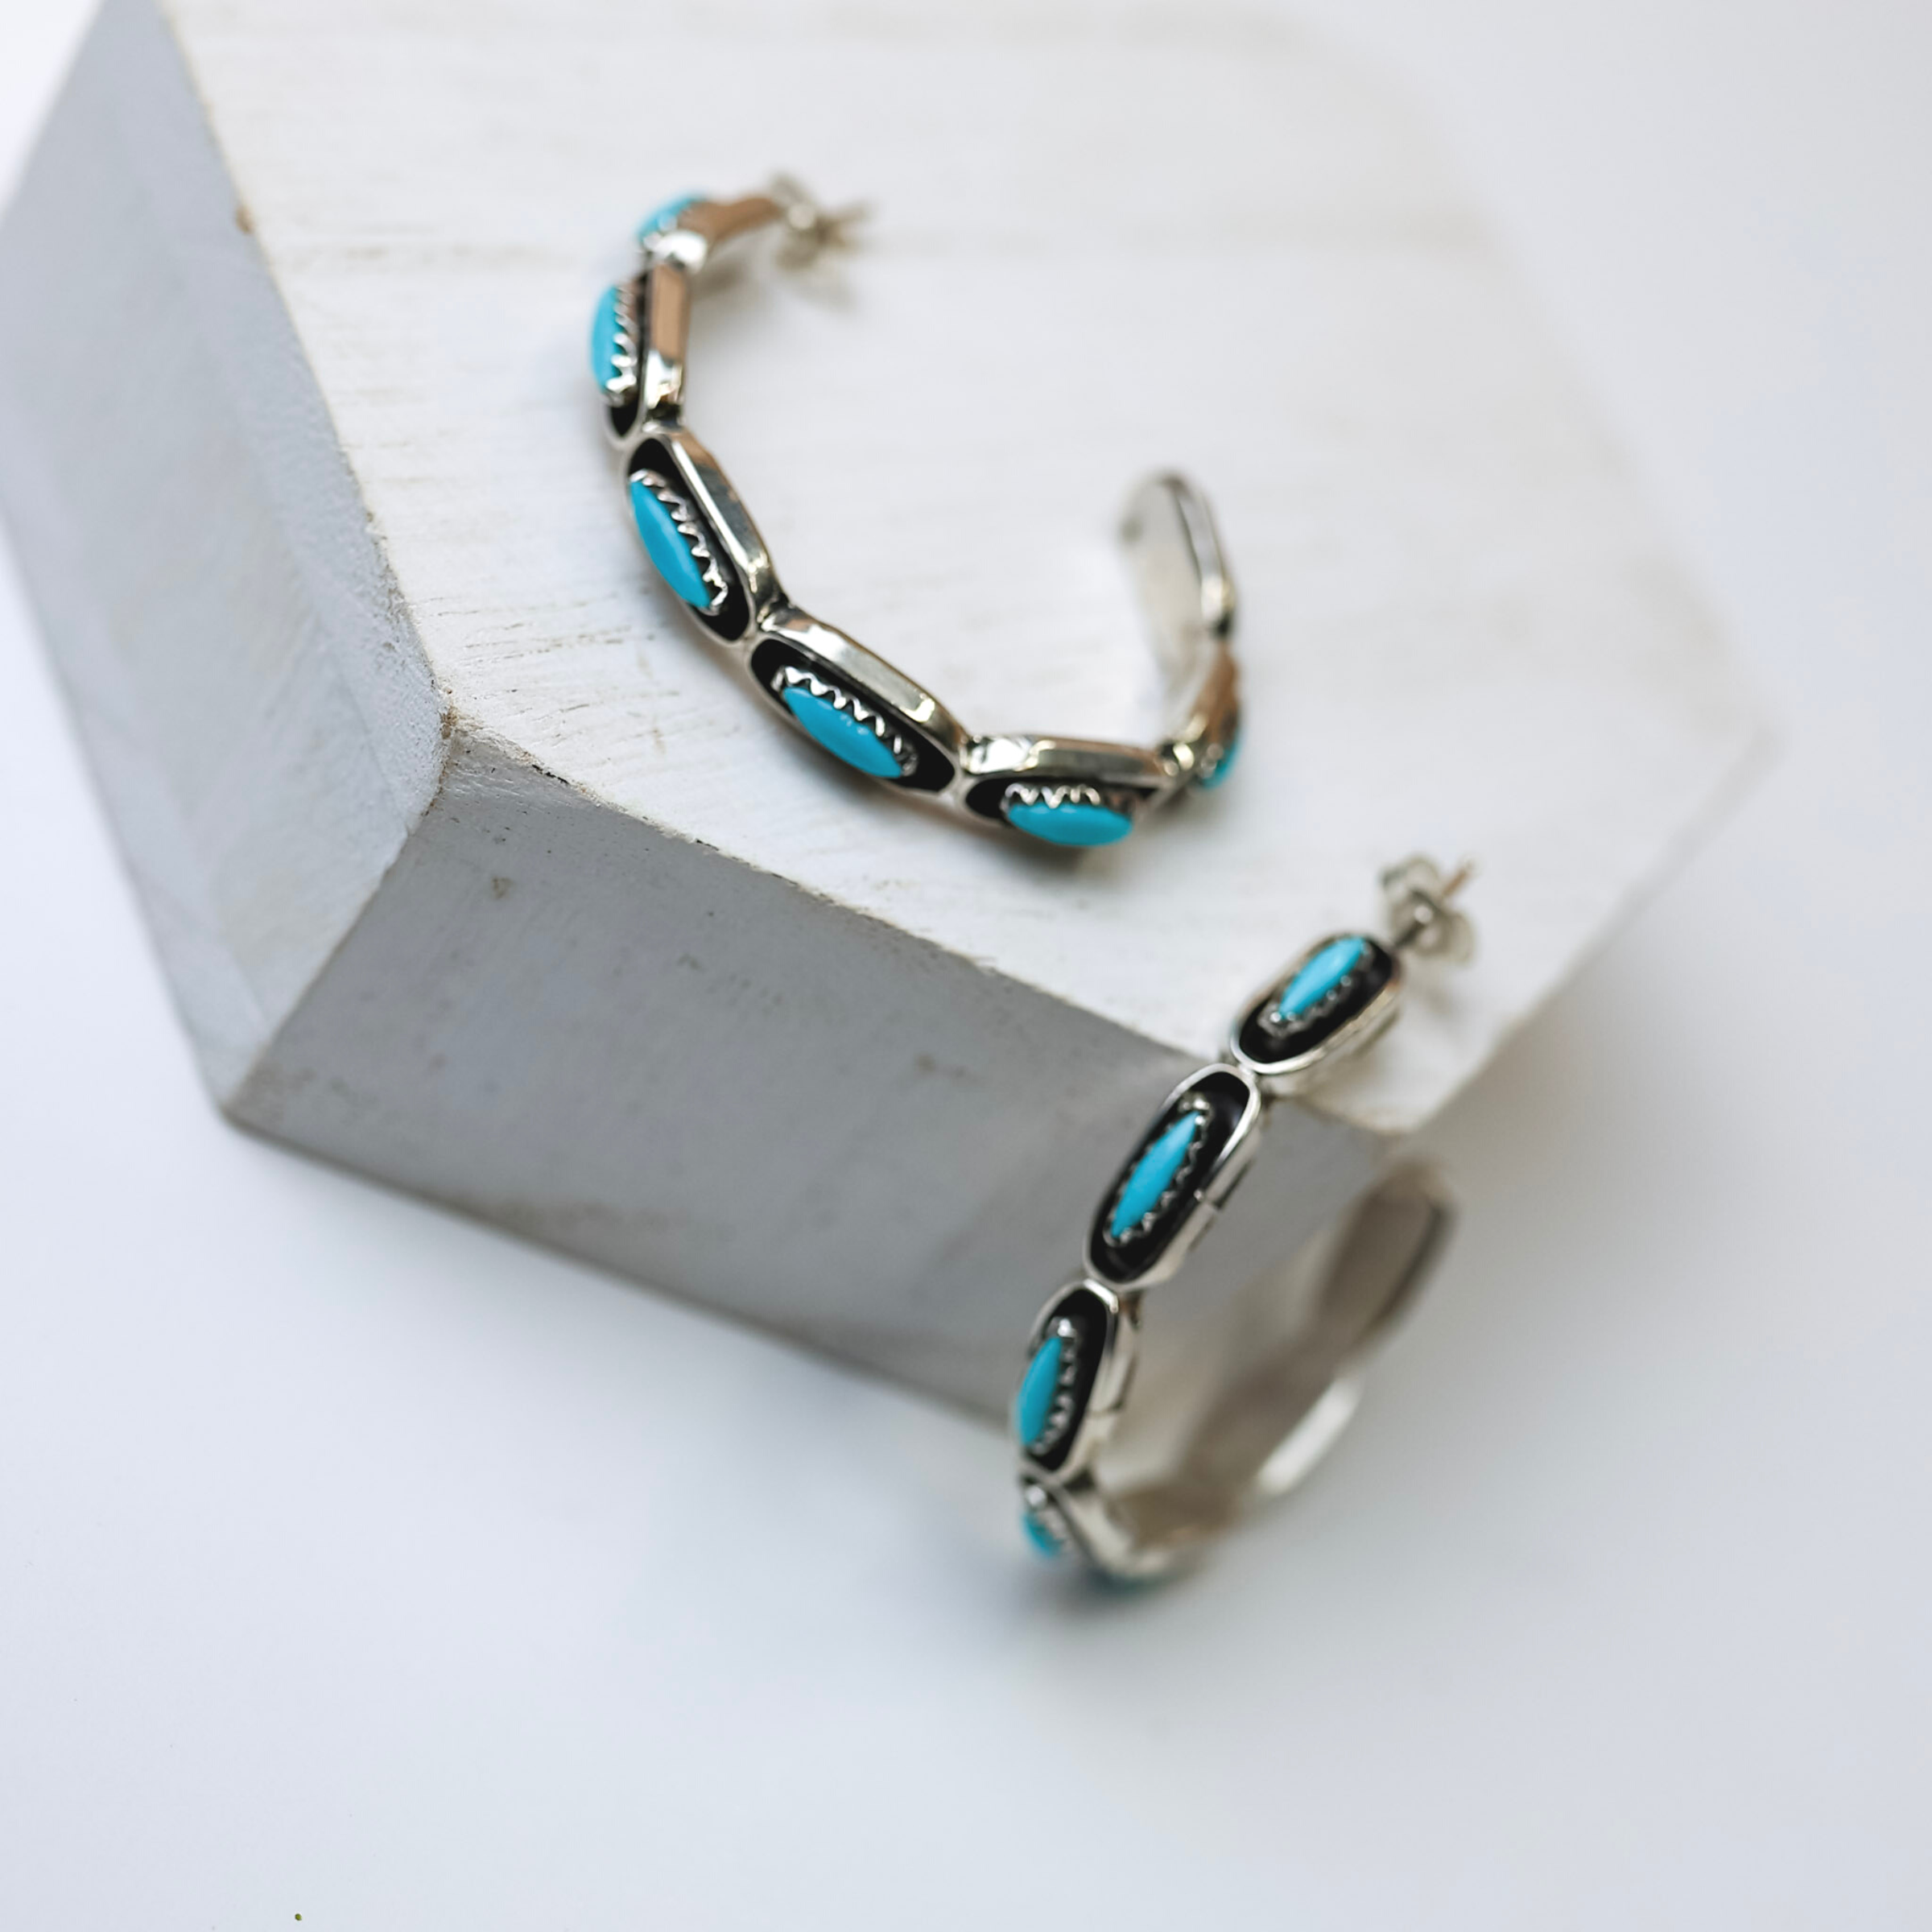 Navajo Handmade Genuine Sterling Silver Hoops with Turquoise Stones are centered in the picture. All background is white. 